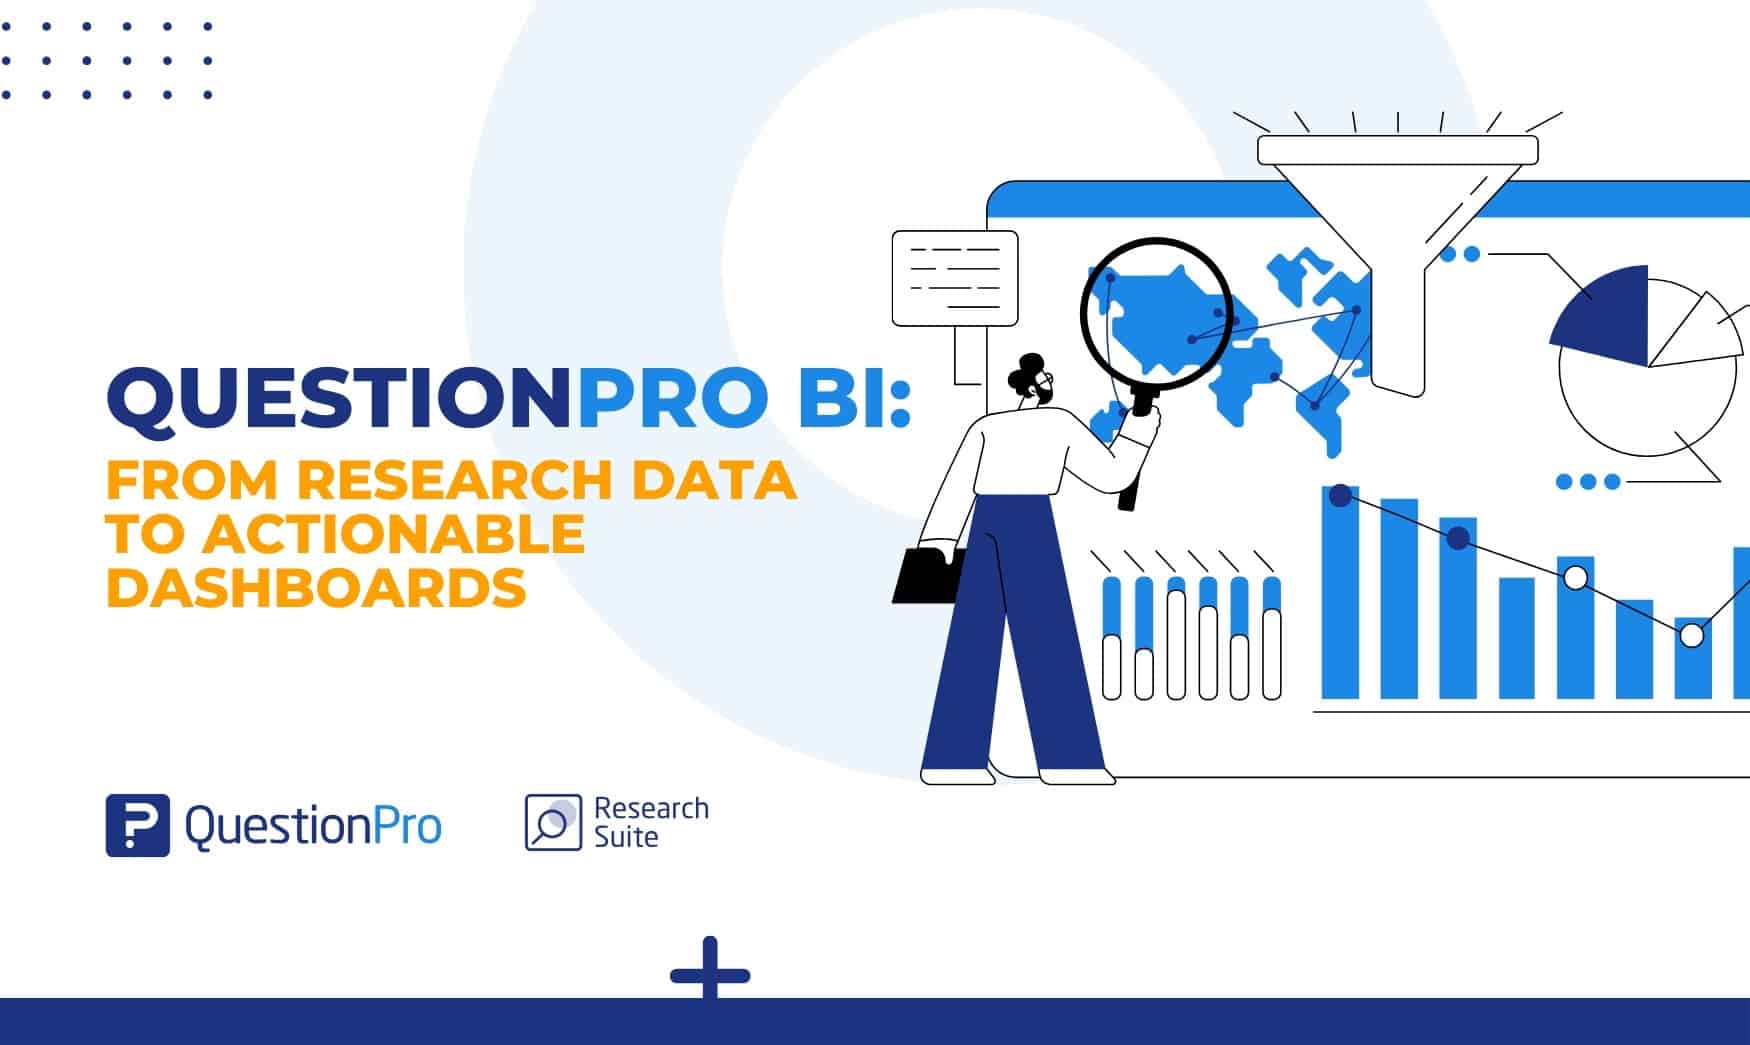 QuestionPro BI: From research data to actionable dashboards within minutes